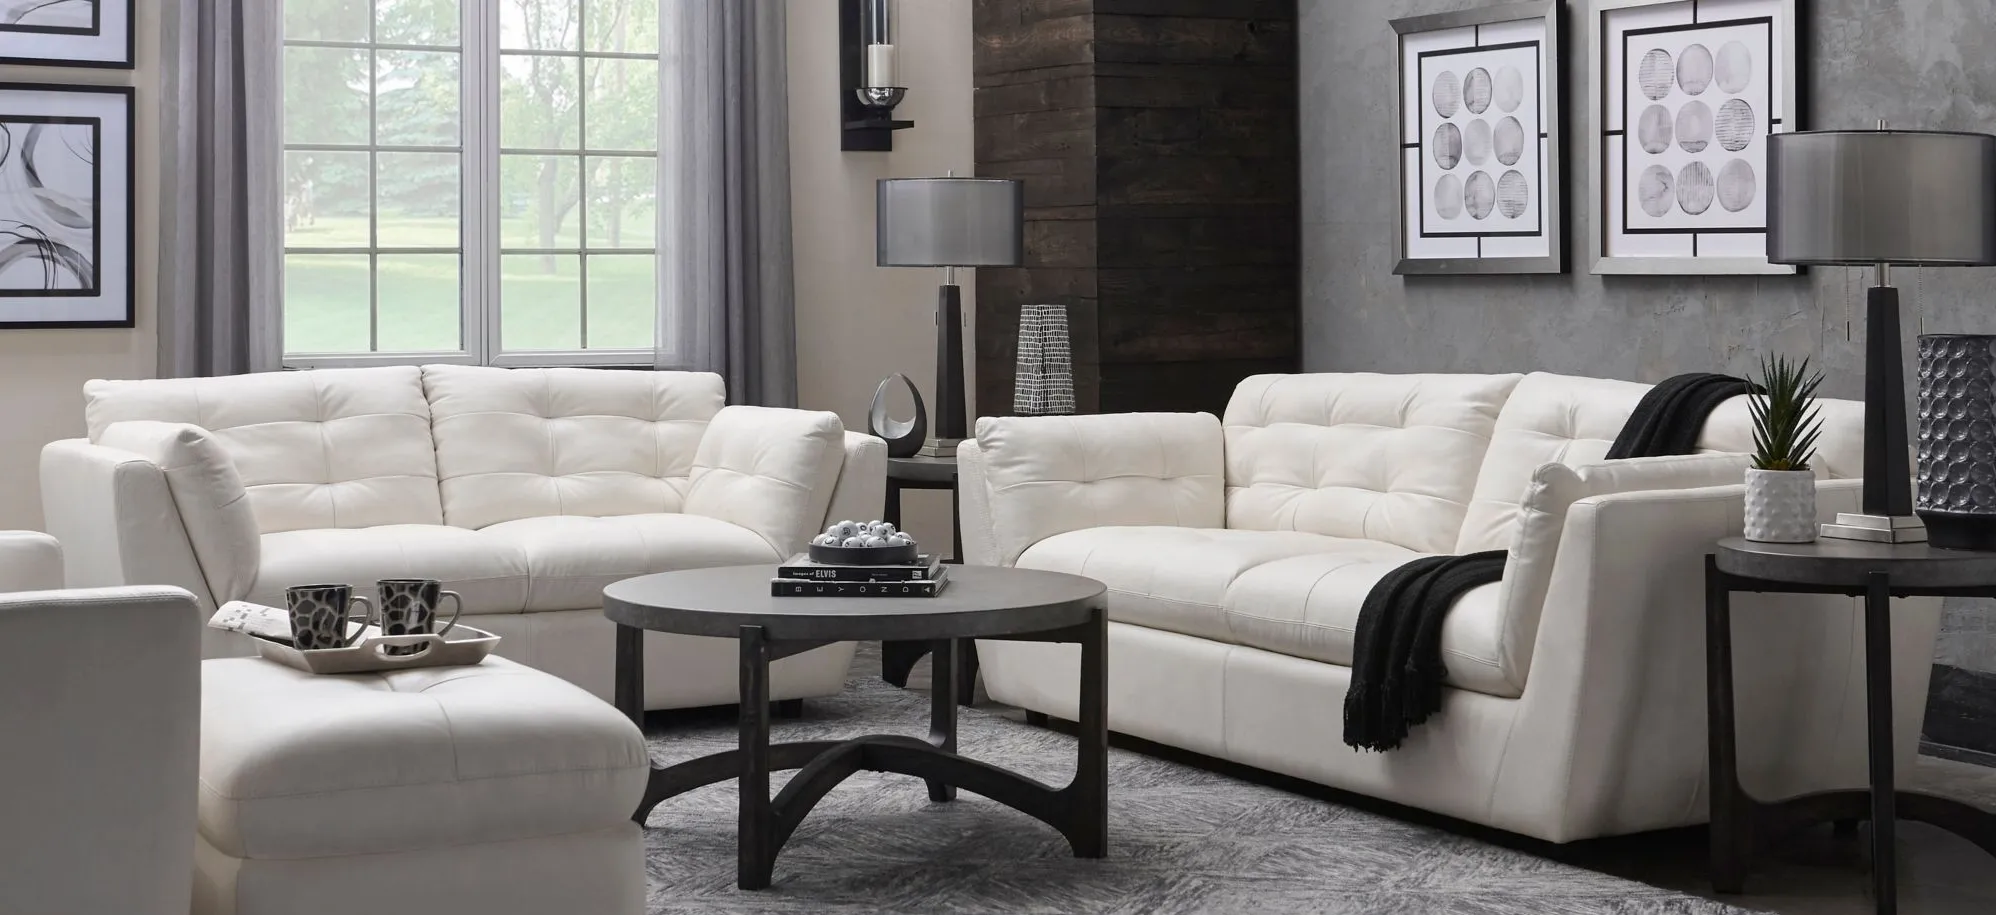 Damar 2-pc.. Leather Sofa and Loveseat Set in White by Chateau D'Ax